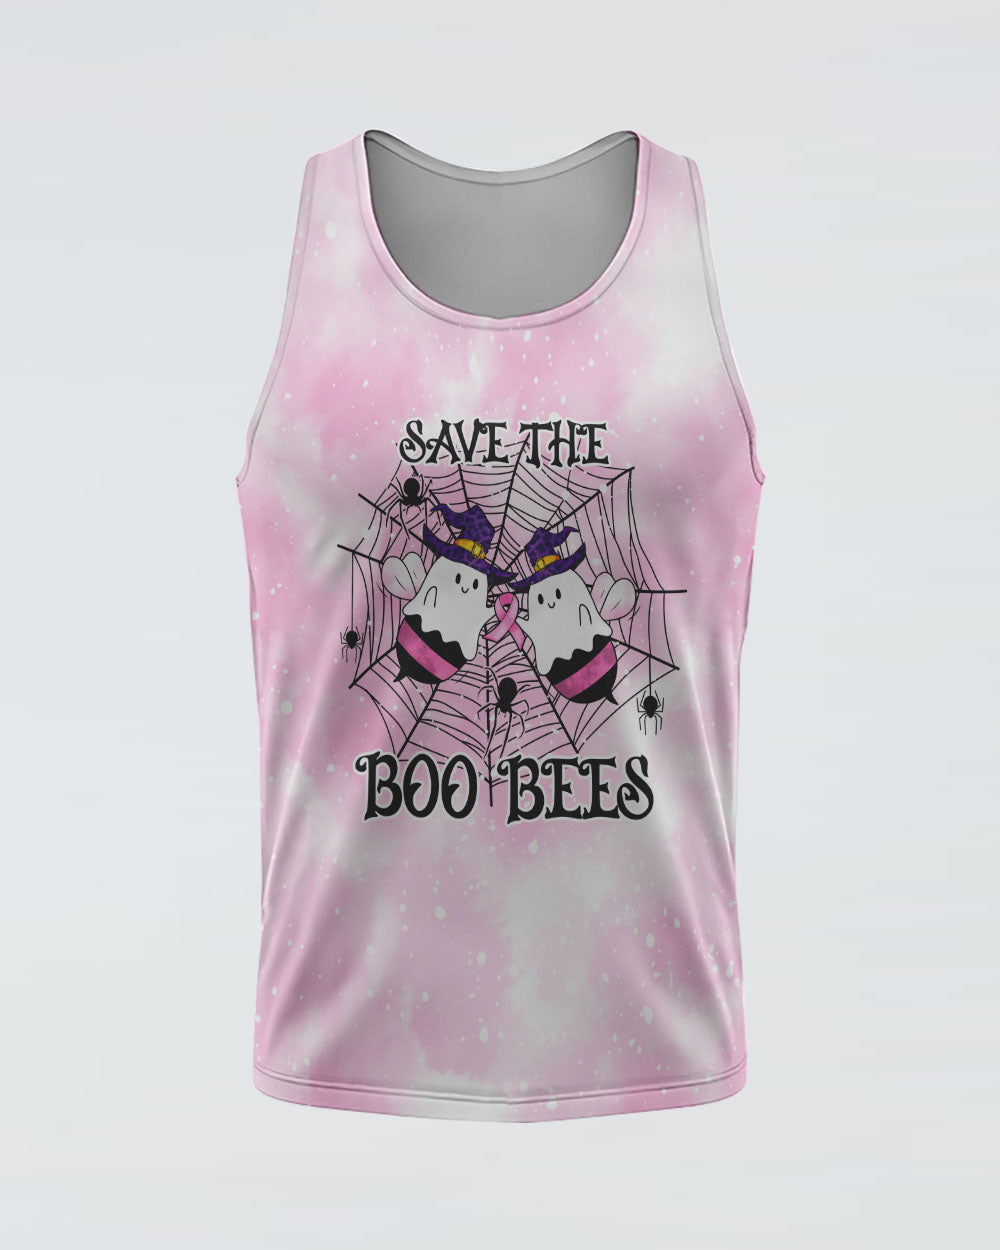 Save The Boo Bees Women's Breast Cancer Awareness Tanks